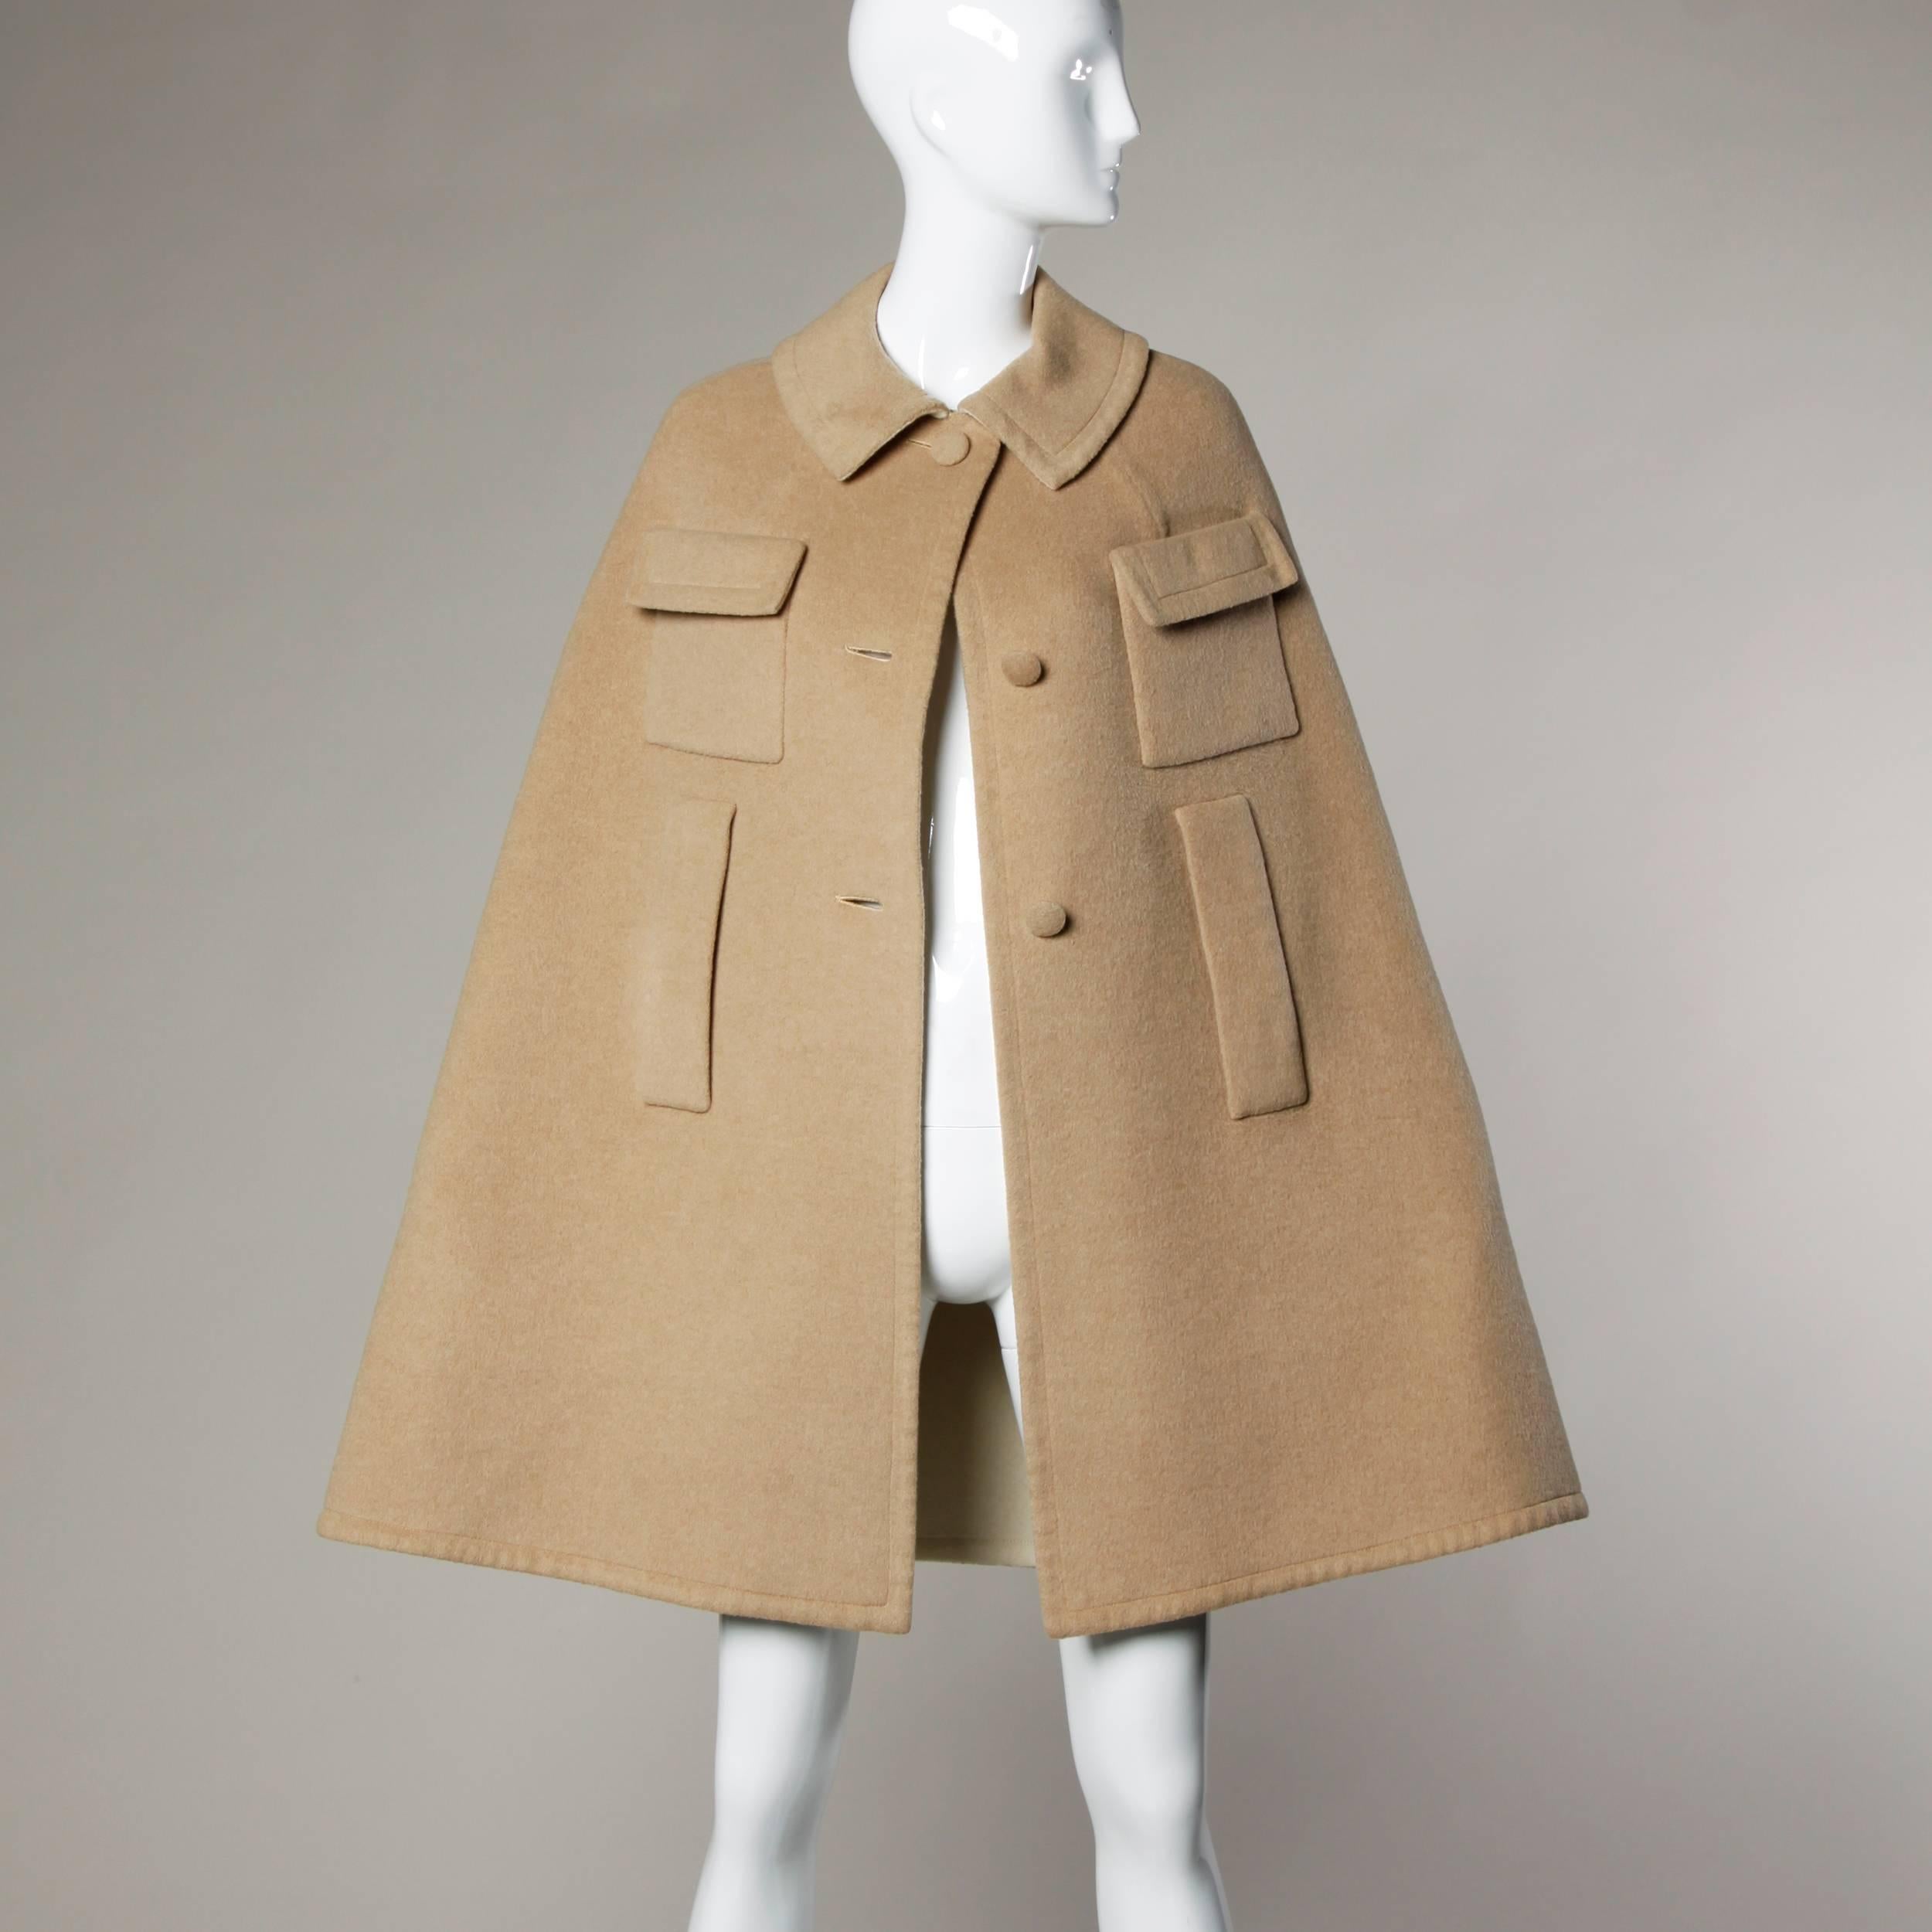 Stunning vintage camel cape coat in a soft luxurious cashmere and wool blend. Reversible construction (except for the labels) indicate that this cape was also intended to be worn with the cream side showing. Very pretty high quality fabric! Made in